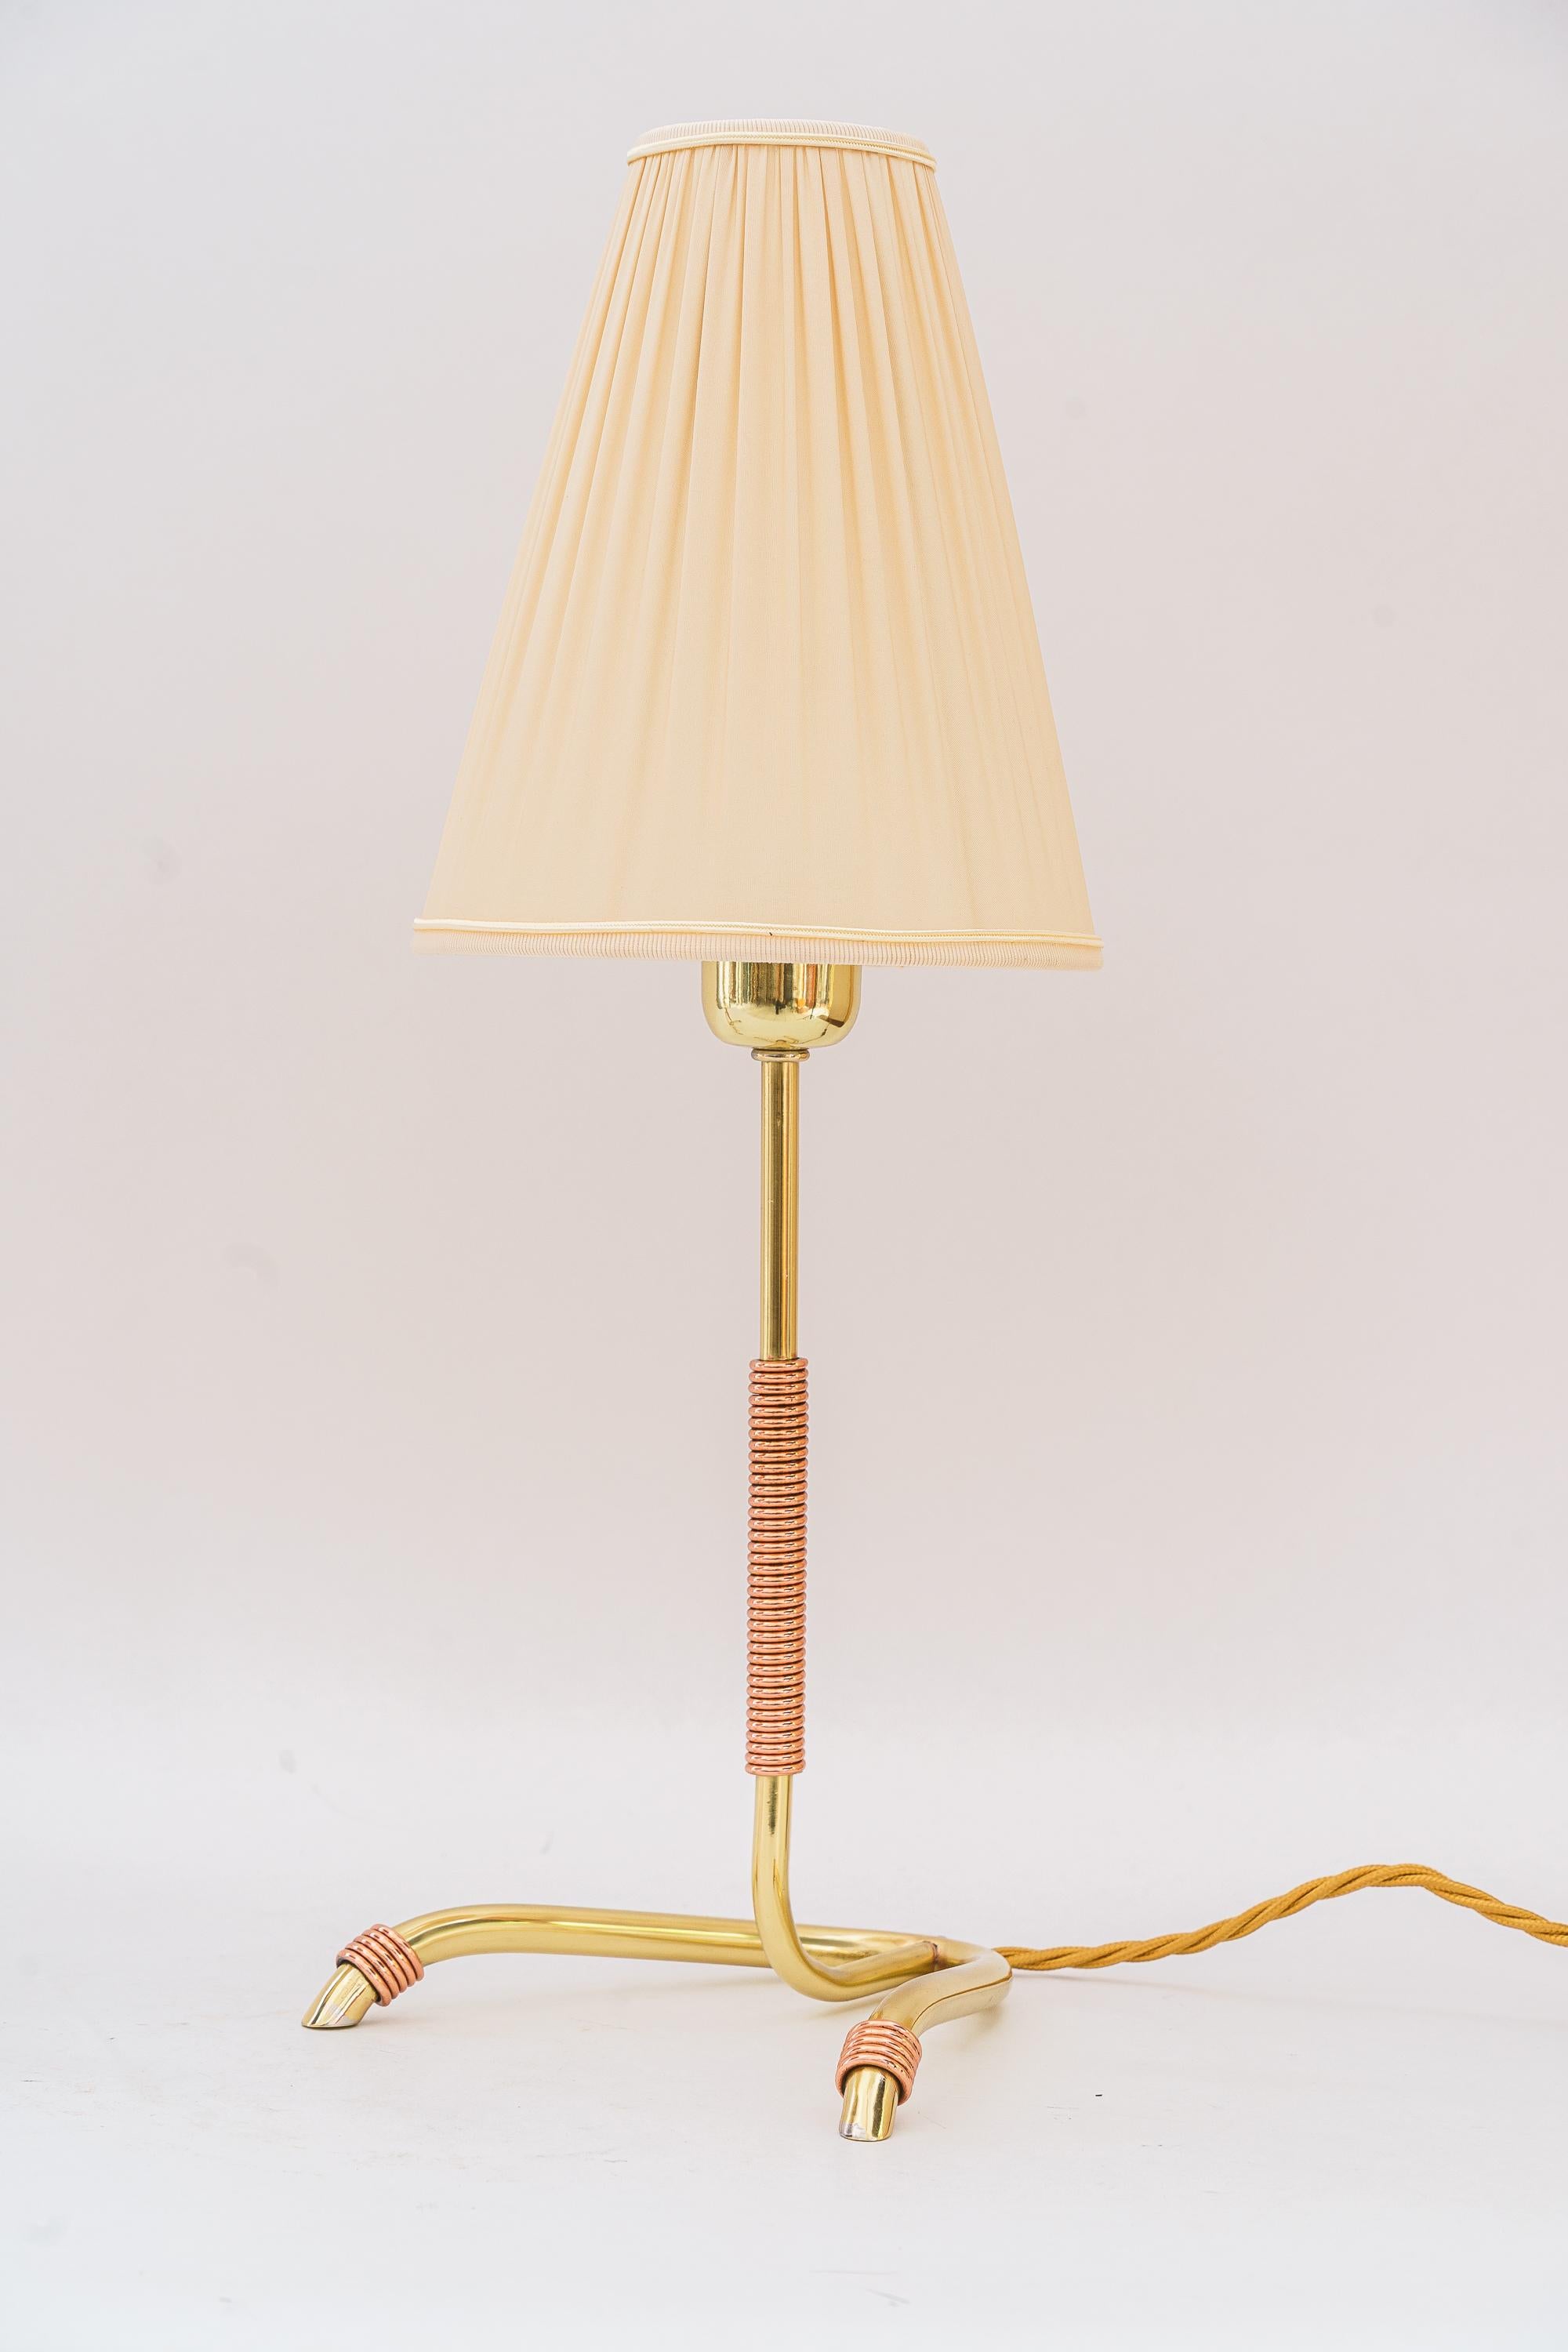 2 rare Rupert Nikoll table lamp vienna around 1950s
Brass polished and stove enameled
fabric shade is replaced ( new )
